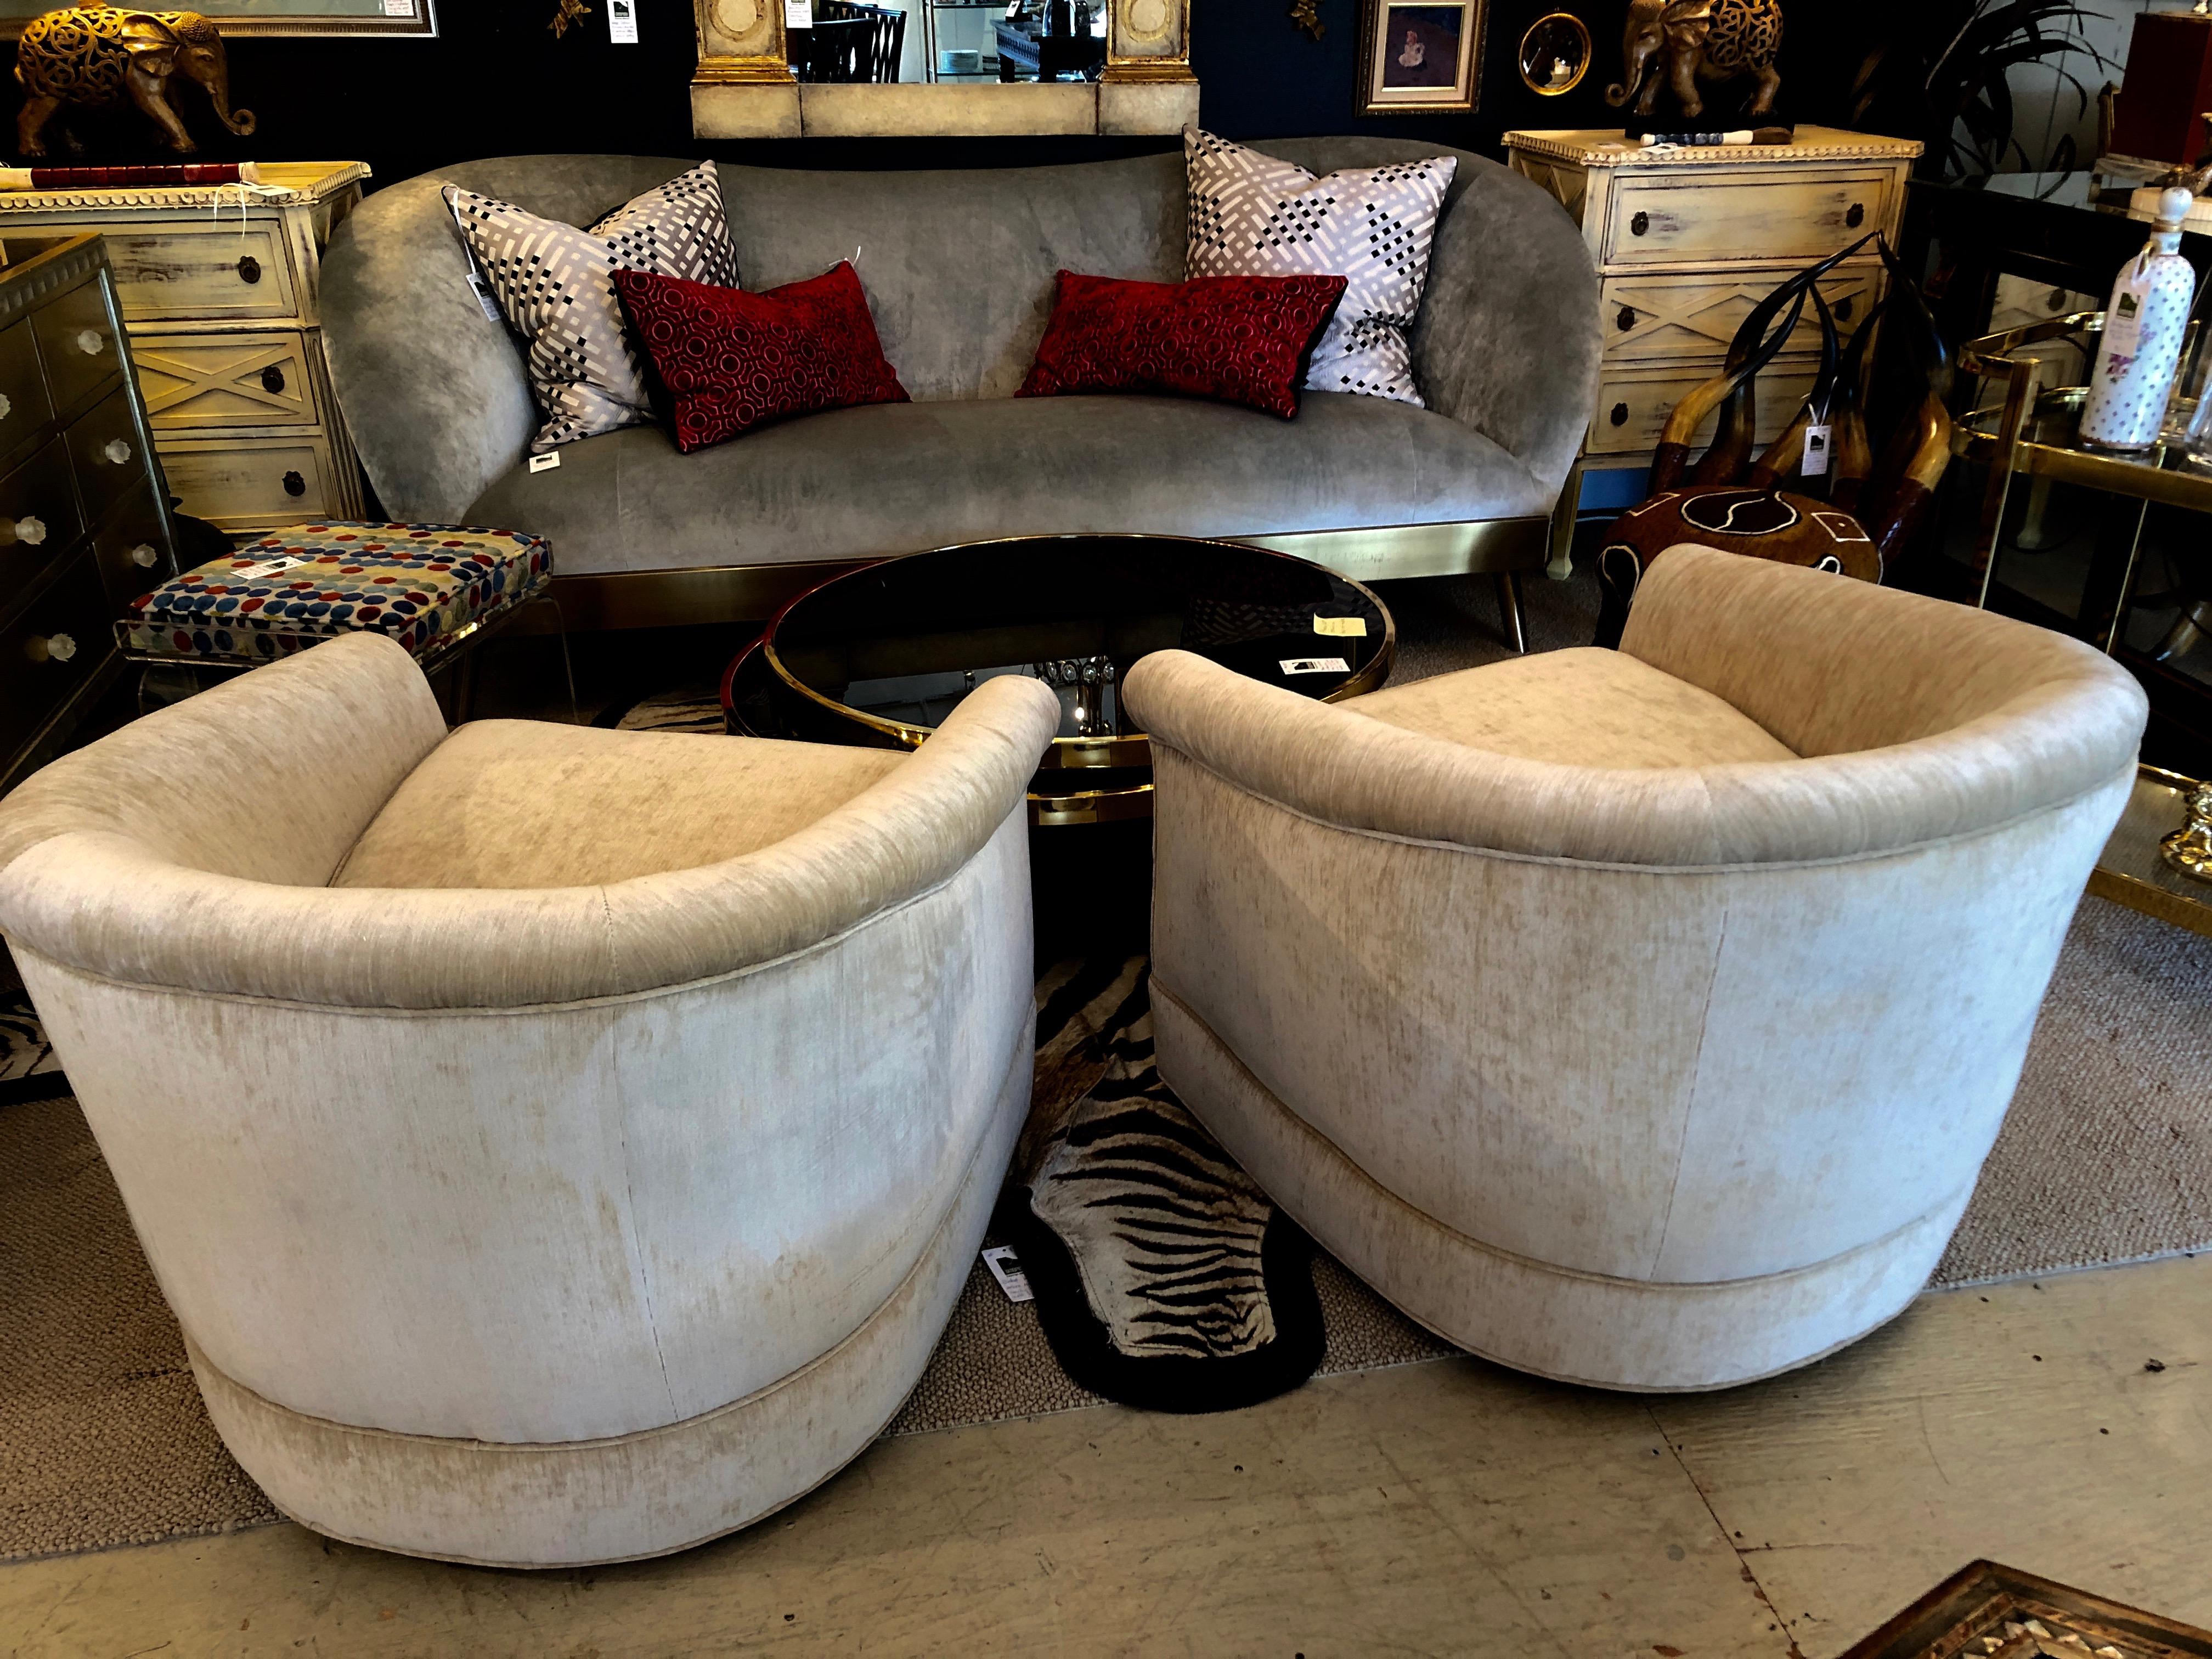 A Milo Baughman style pair of curvy club chairs that swivel, having brand new soft camel colored velvet upholstery. Super solid and comfy.
Measures: seat depth 23 inches.